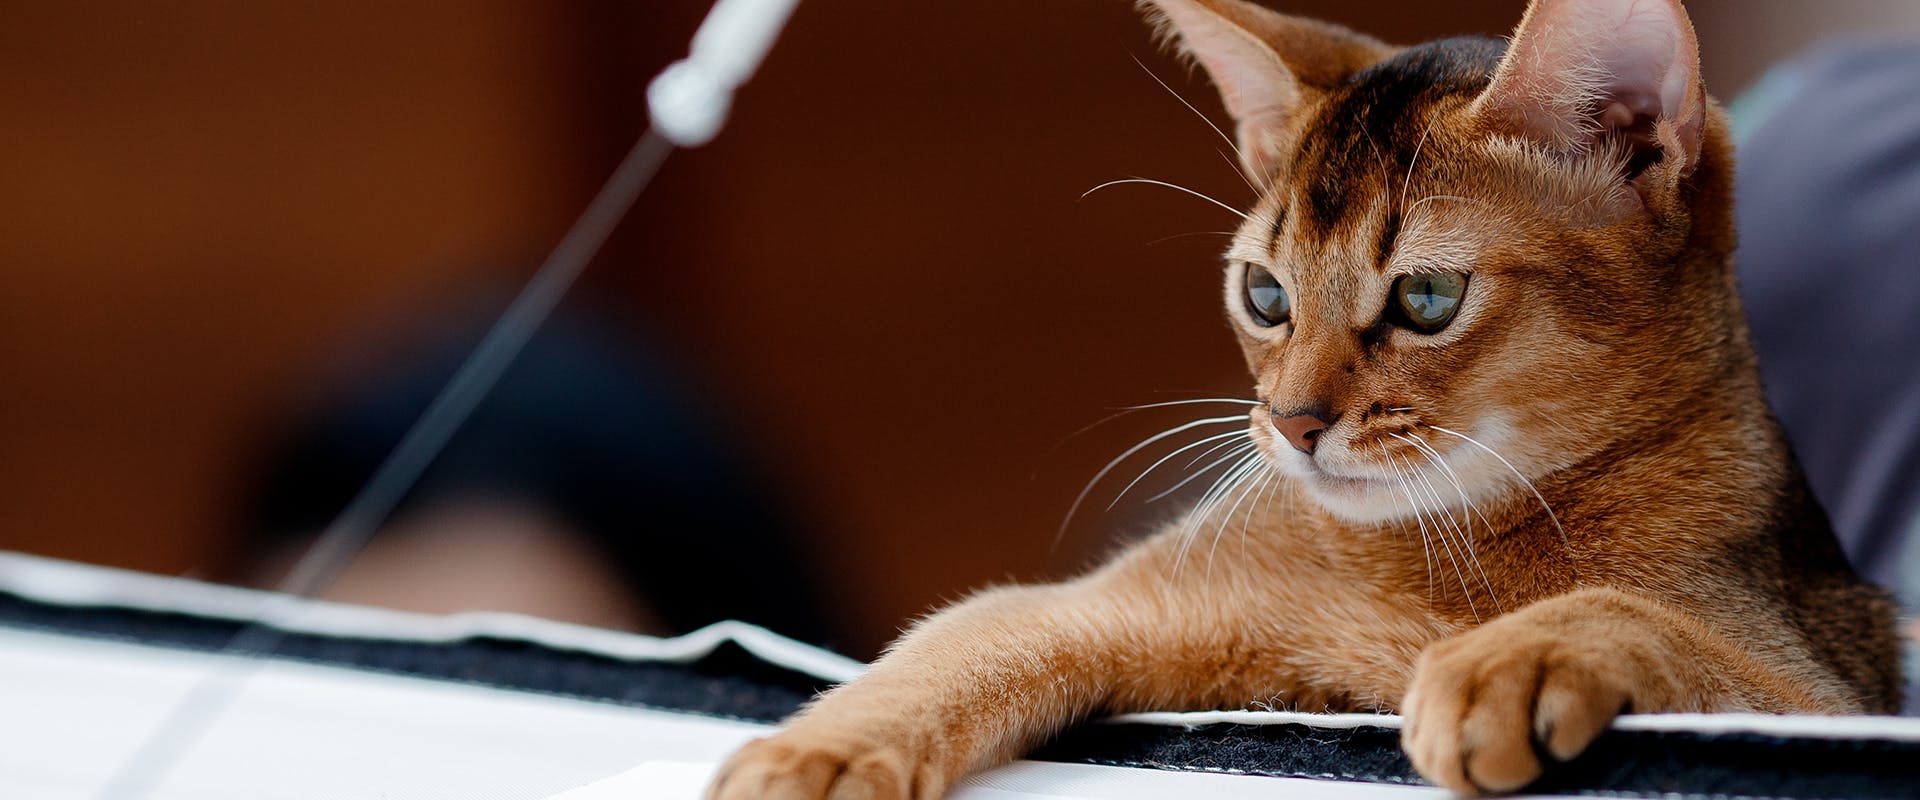 An Abyssinian cat playing with a string toy